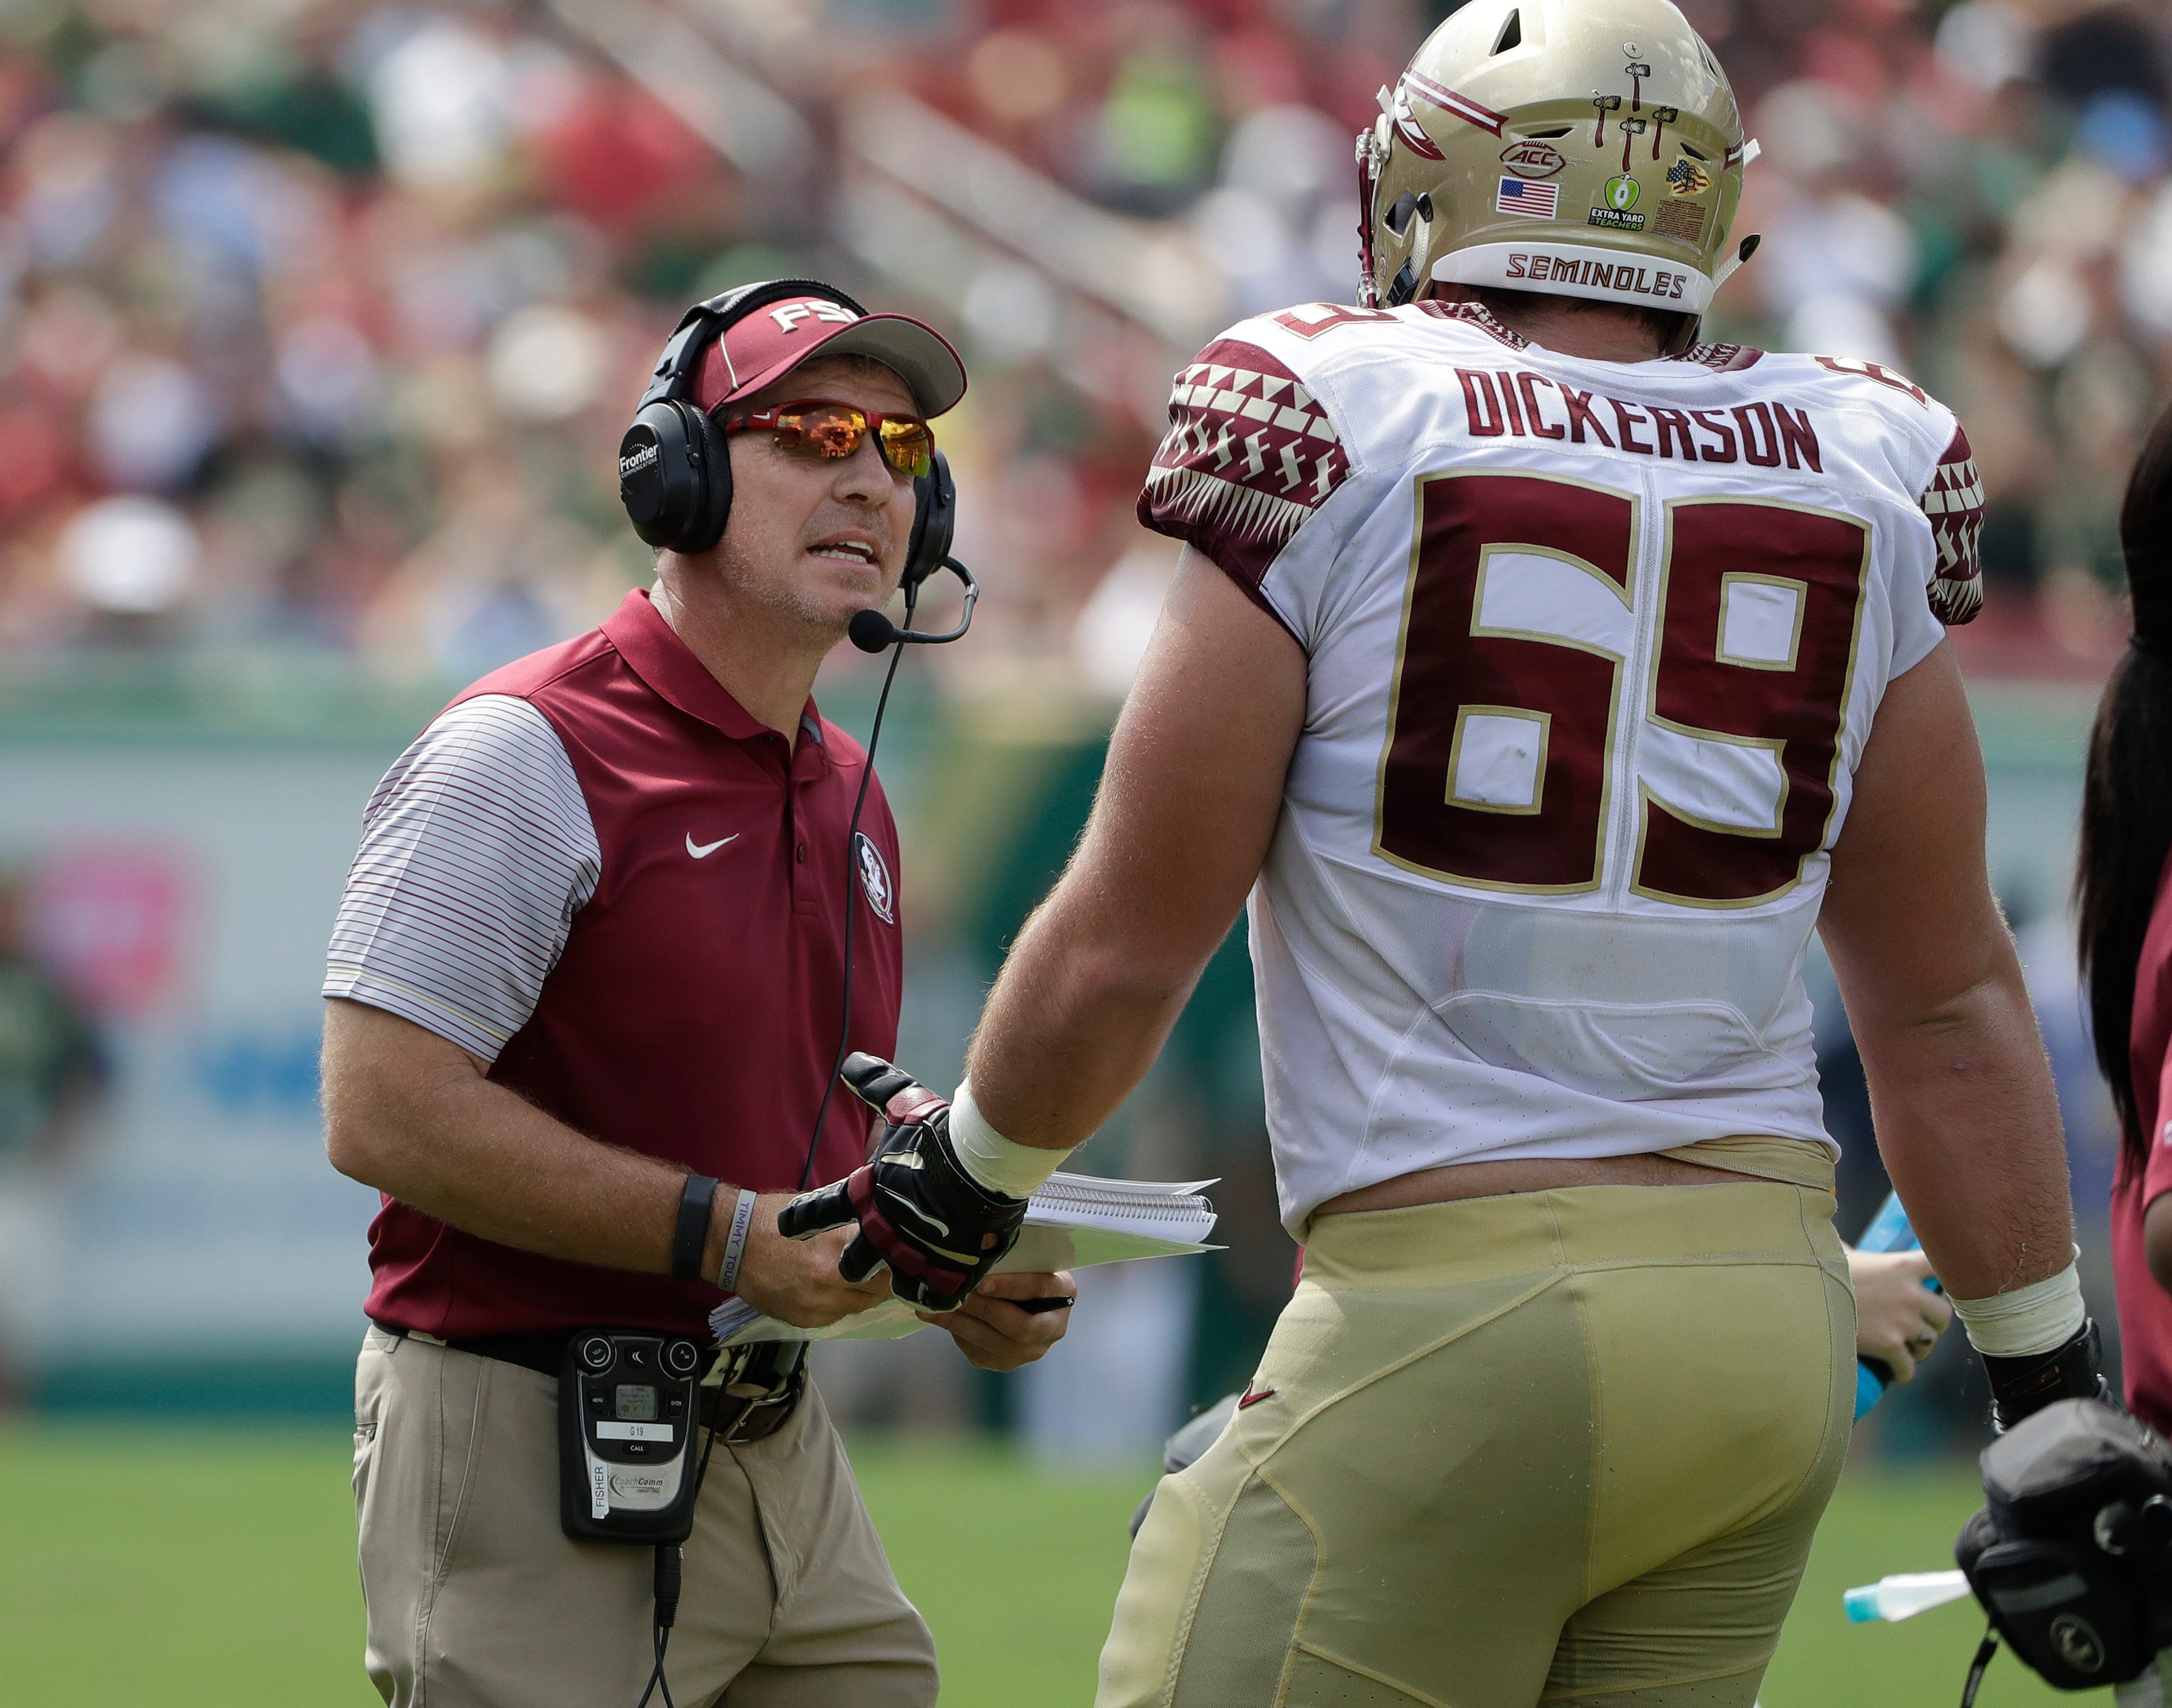 Florida State head coach Jimbo Fisher, left, talks to offensive lineman Landon Dickerson (69) during the first quarter of an NCAA college football game against South Florida Saturday, Sept. 24, 2016, in Tampa, Fla. (AP Photo/Chris O'Meara)